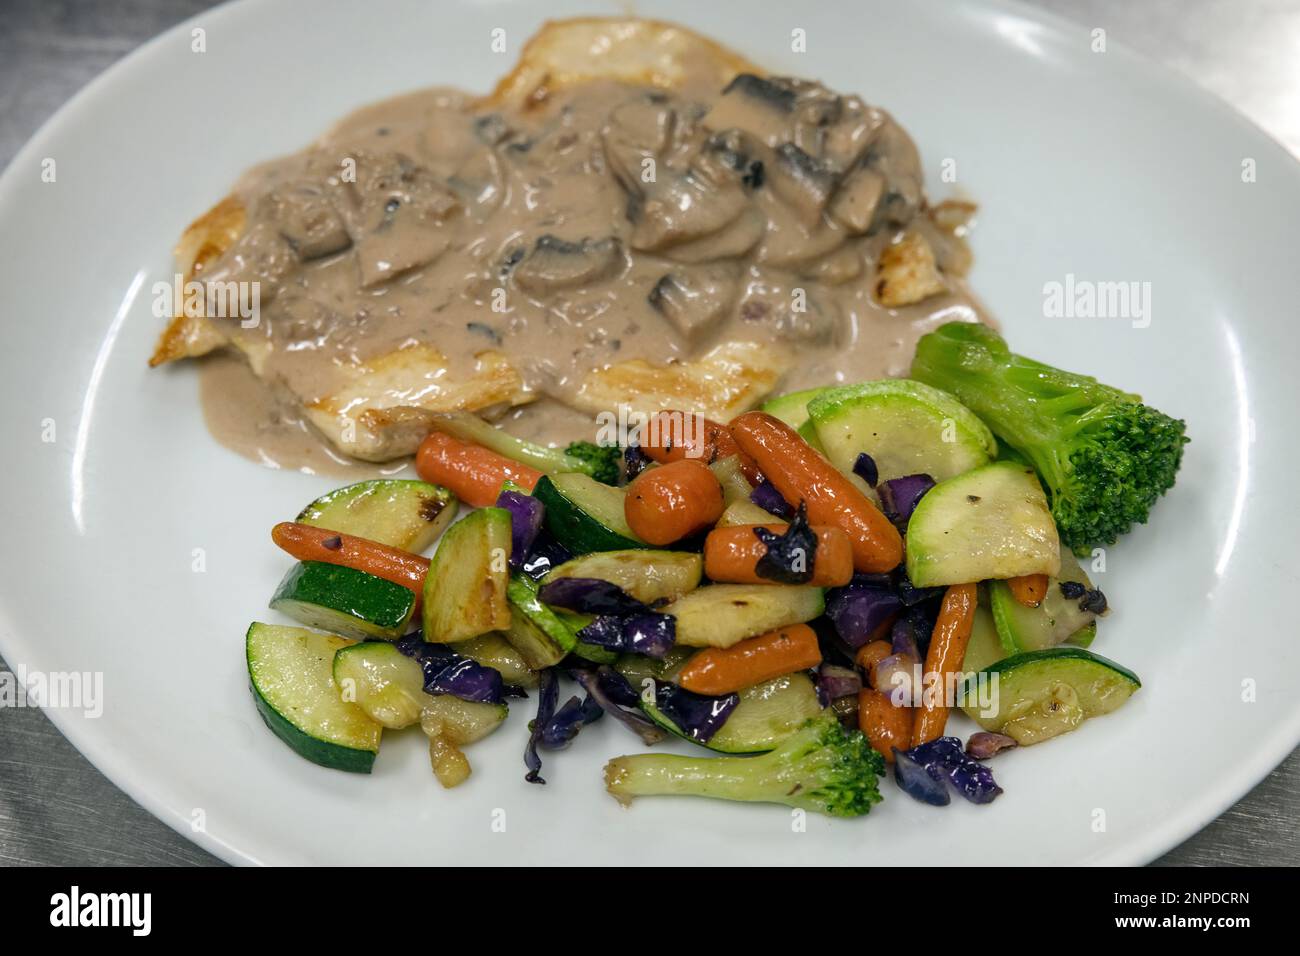 Tasty chicken with mushroom sauce and grilled vegetables aside ready to be consumed, appetizing dish offering a diverse range of veggies and a protein Stock Photo